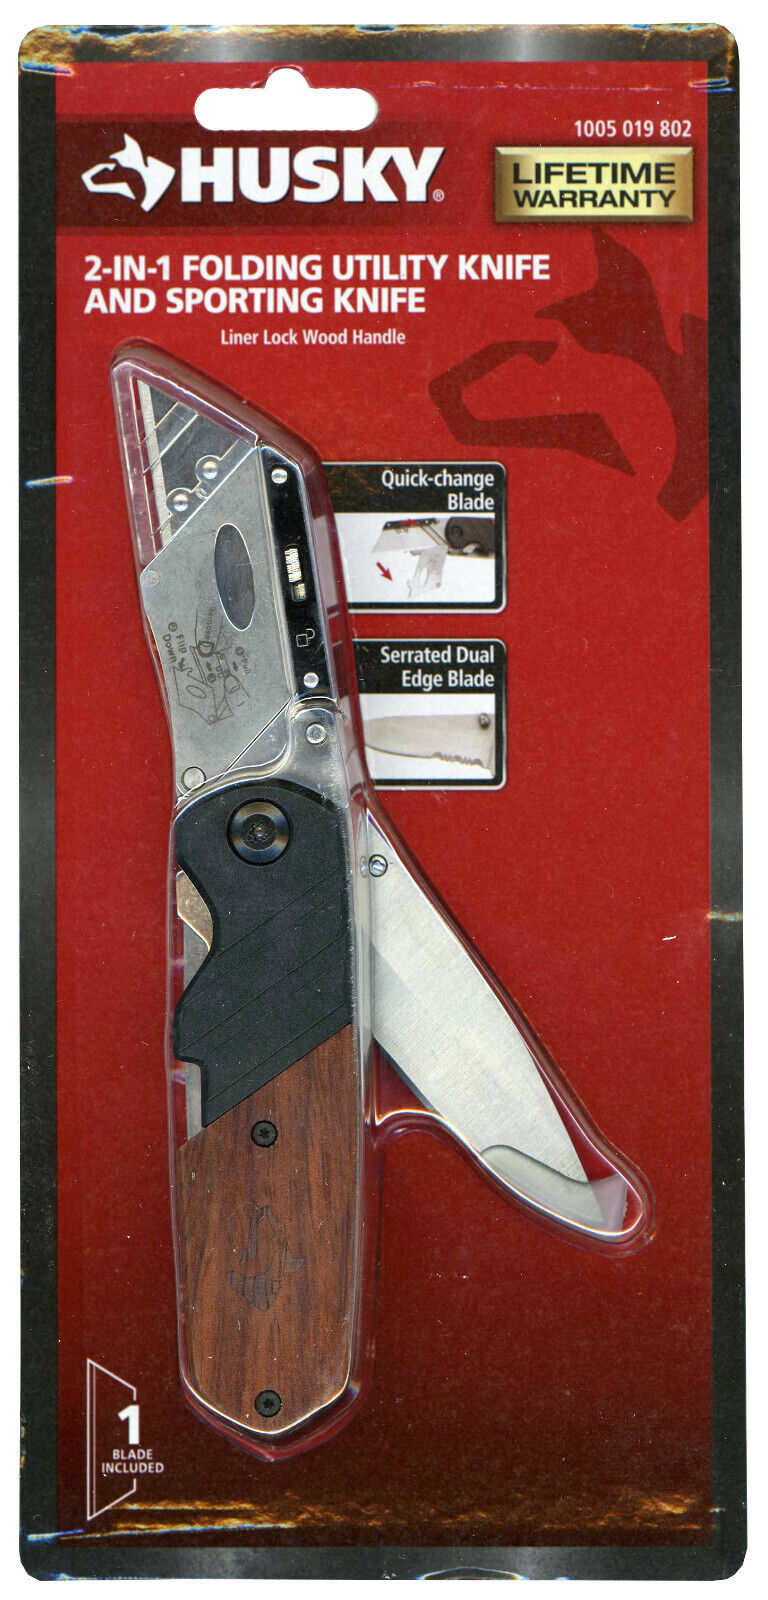 Husky 2-in-1 FOLDING UTILITY KNIFE & SPORTING KNIFE, QUICK-CHANGE BLADE  Wooden